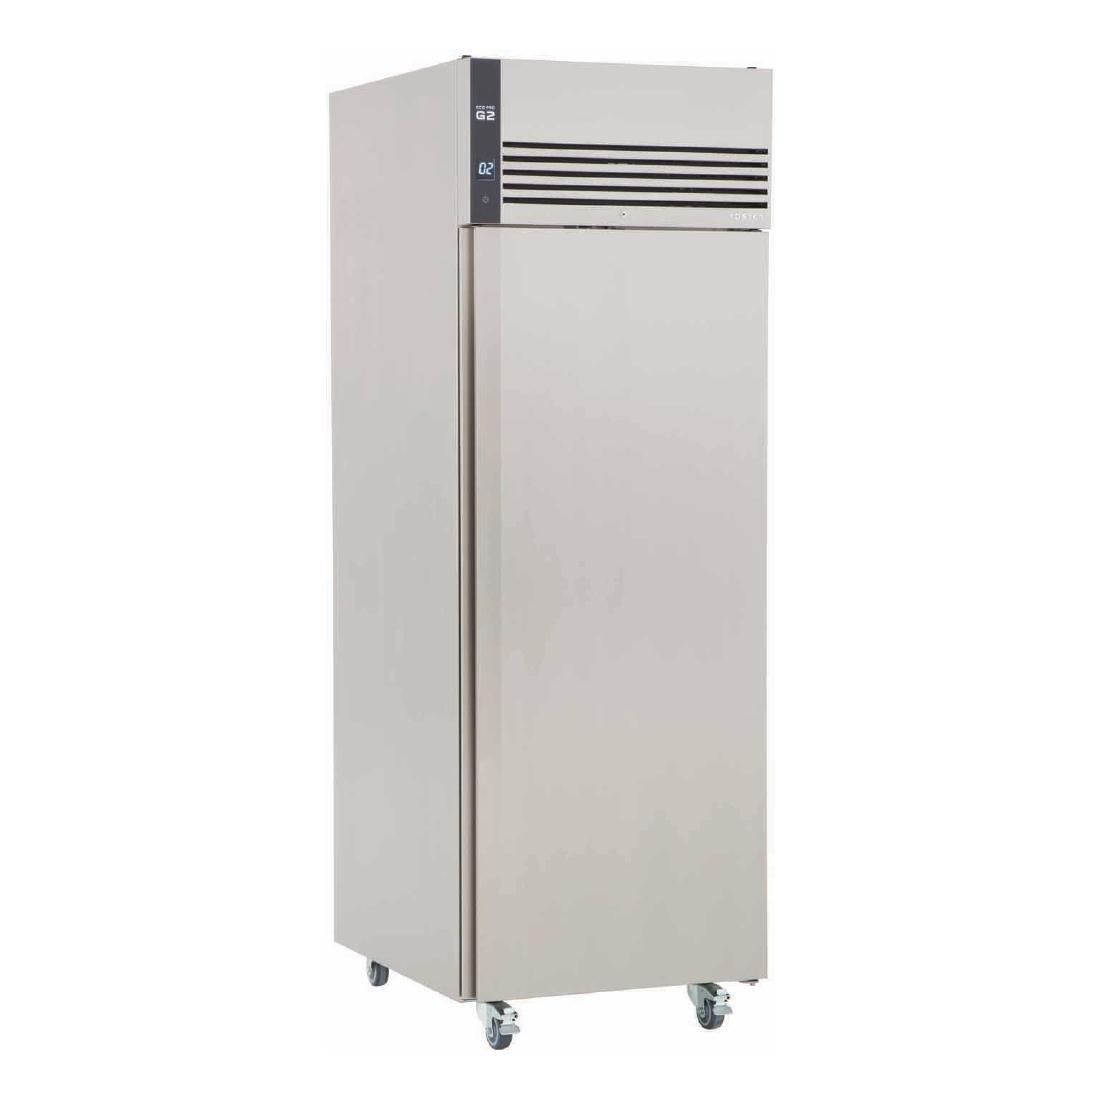 Foster EcoPro G2 1 Door 600Ltr Cabinet Meat Fridge with Back EP700M 10/123